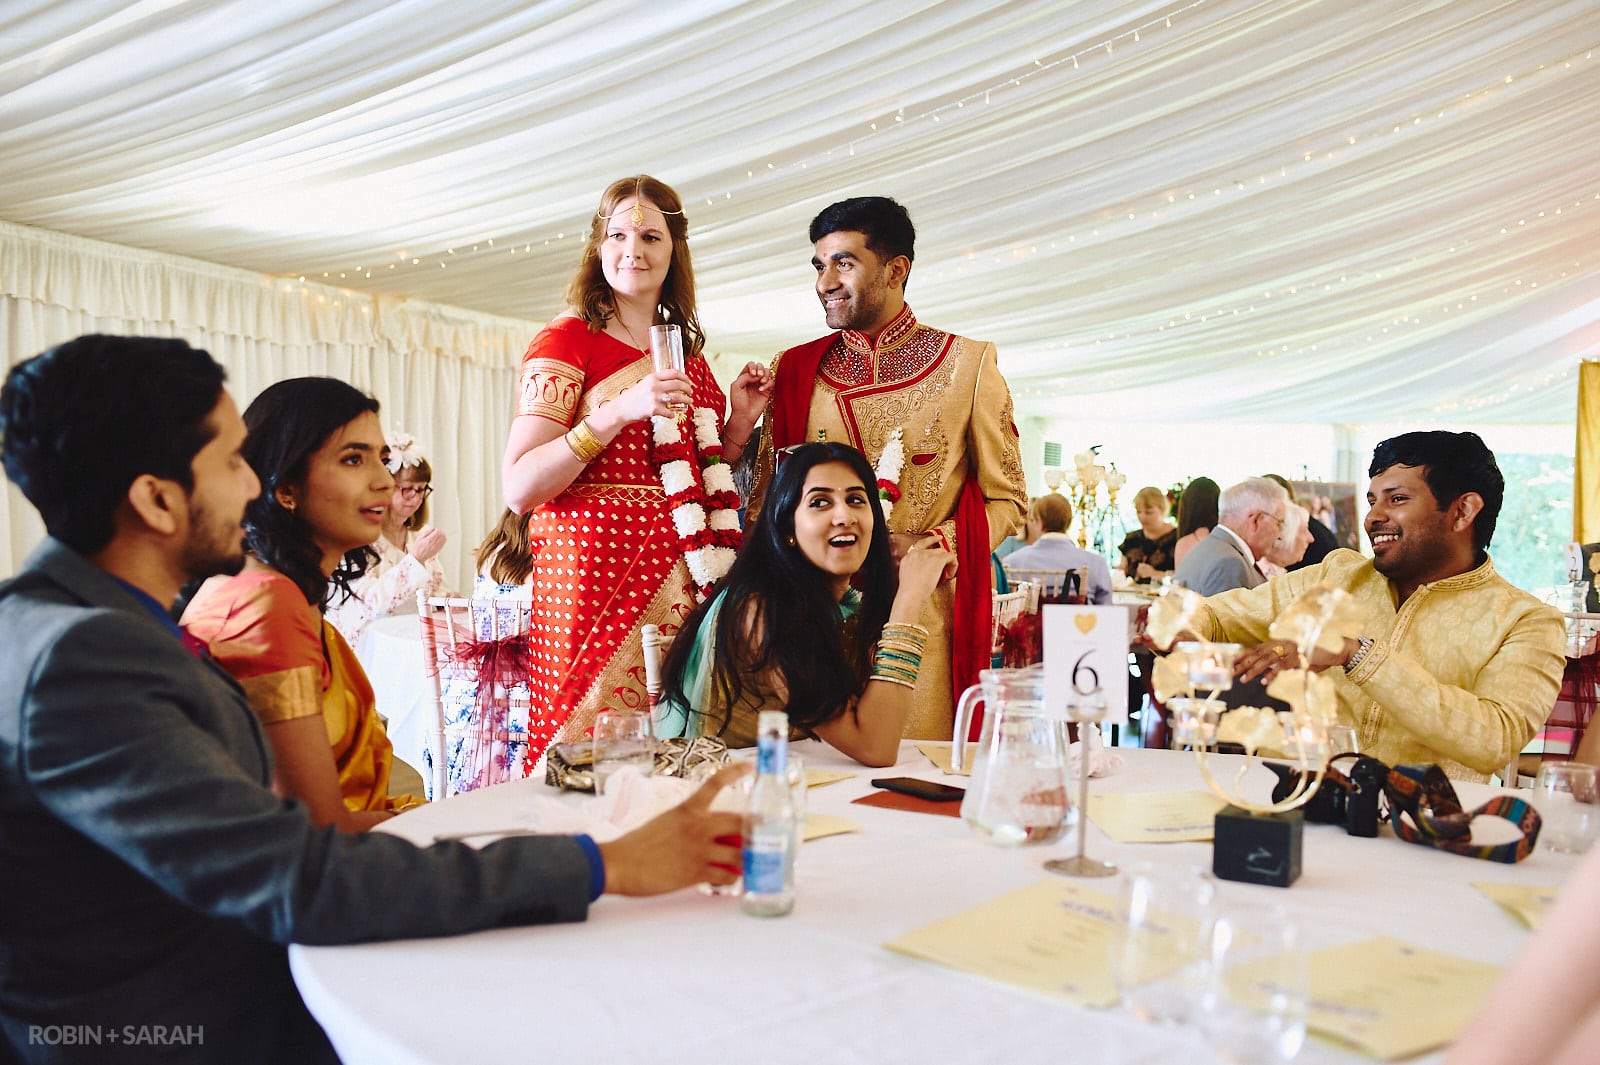 Bride and groom chat with wedding guests during meal